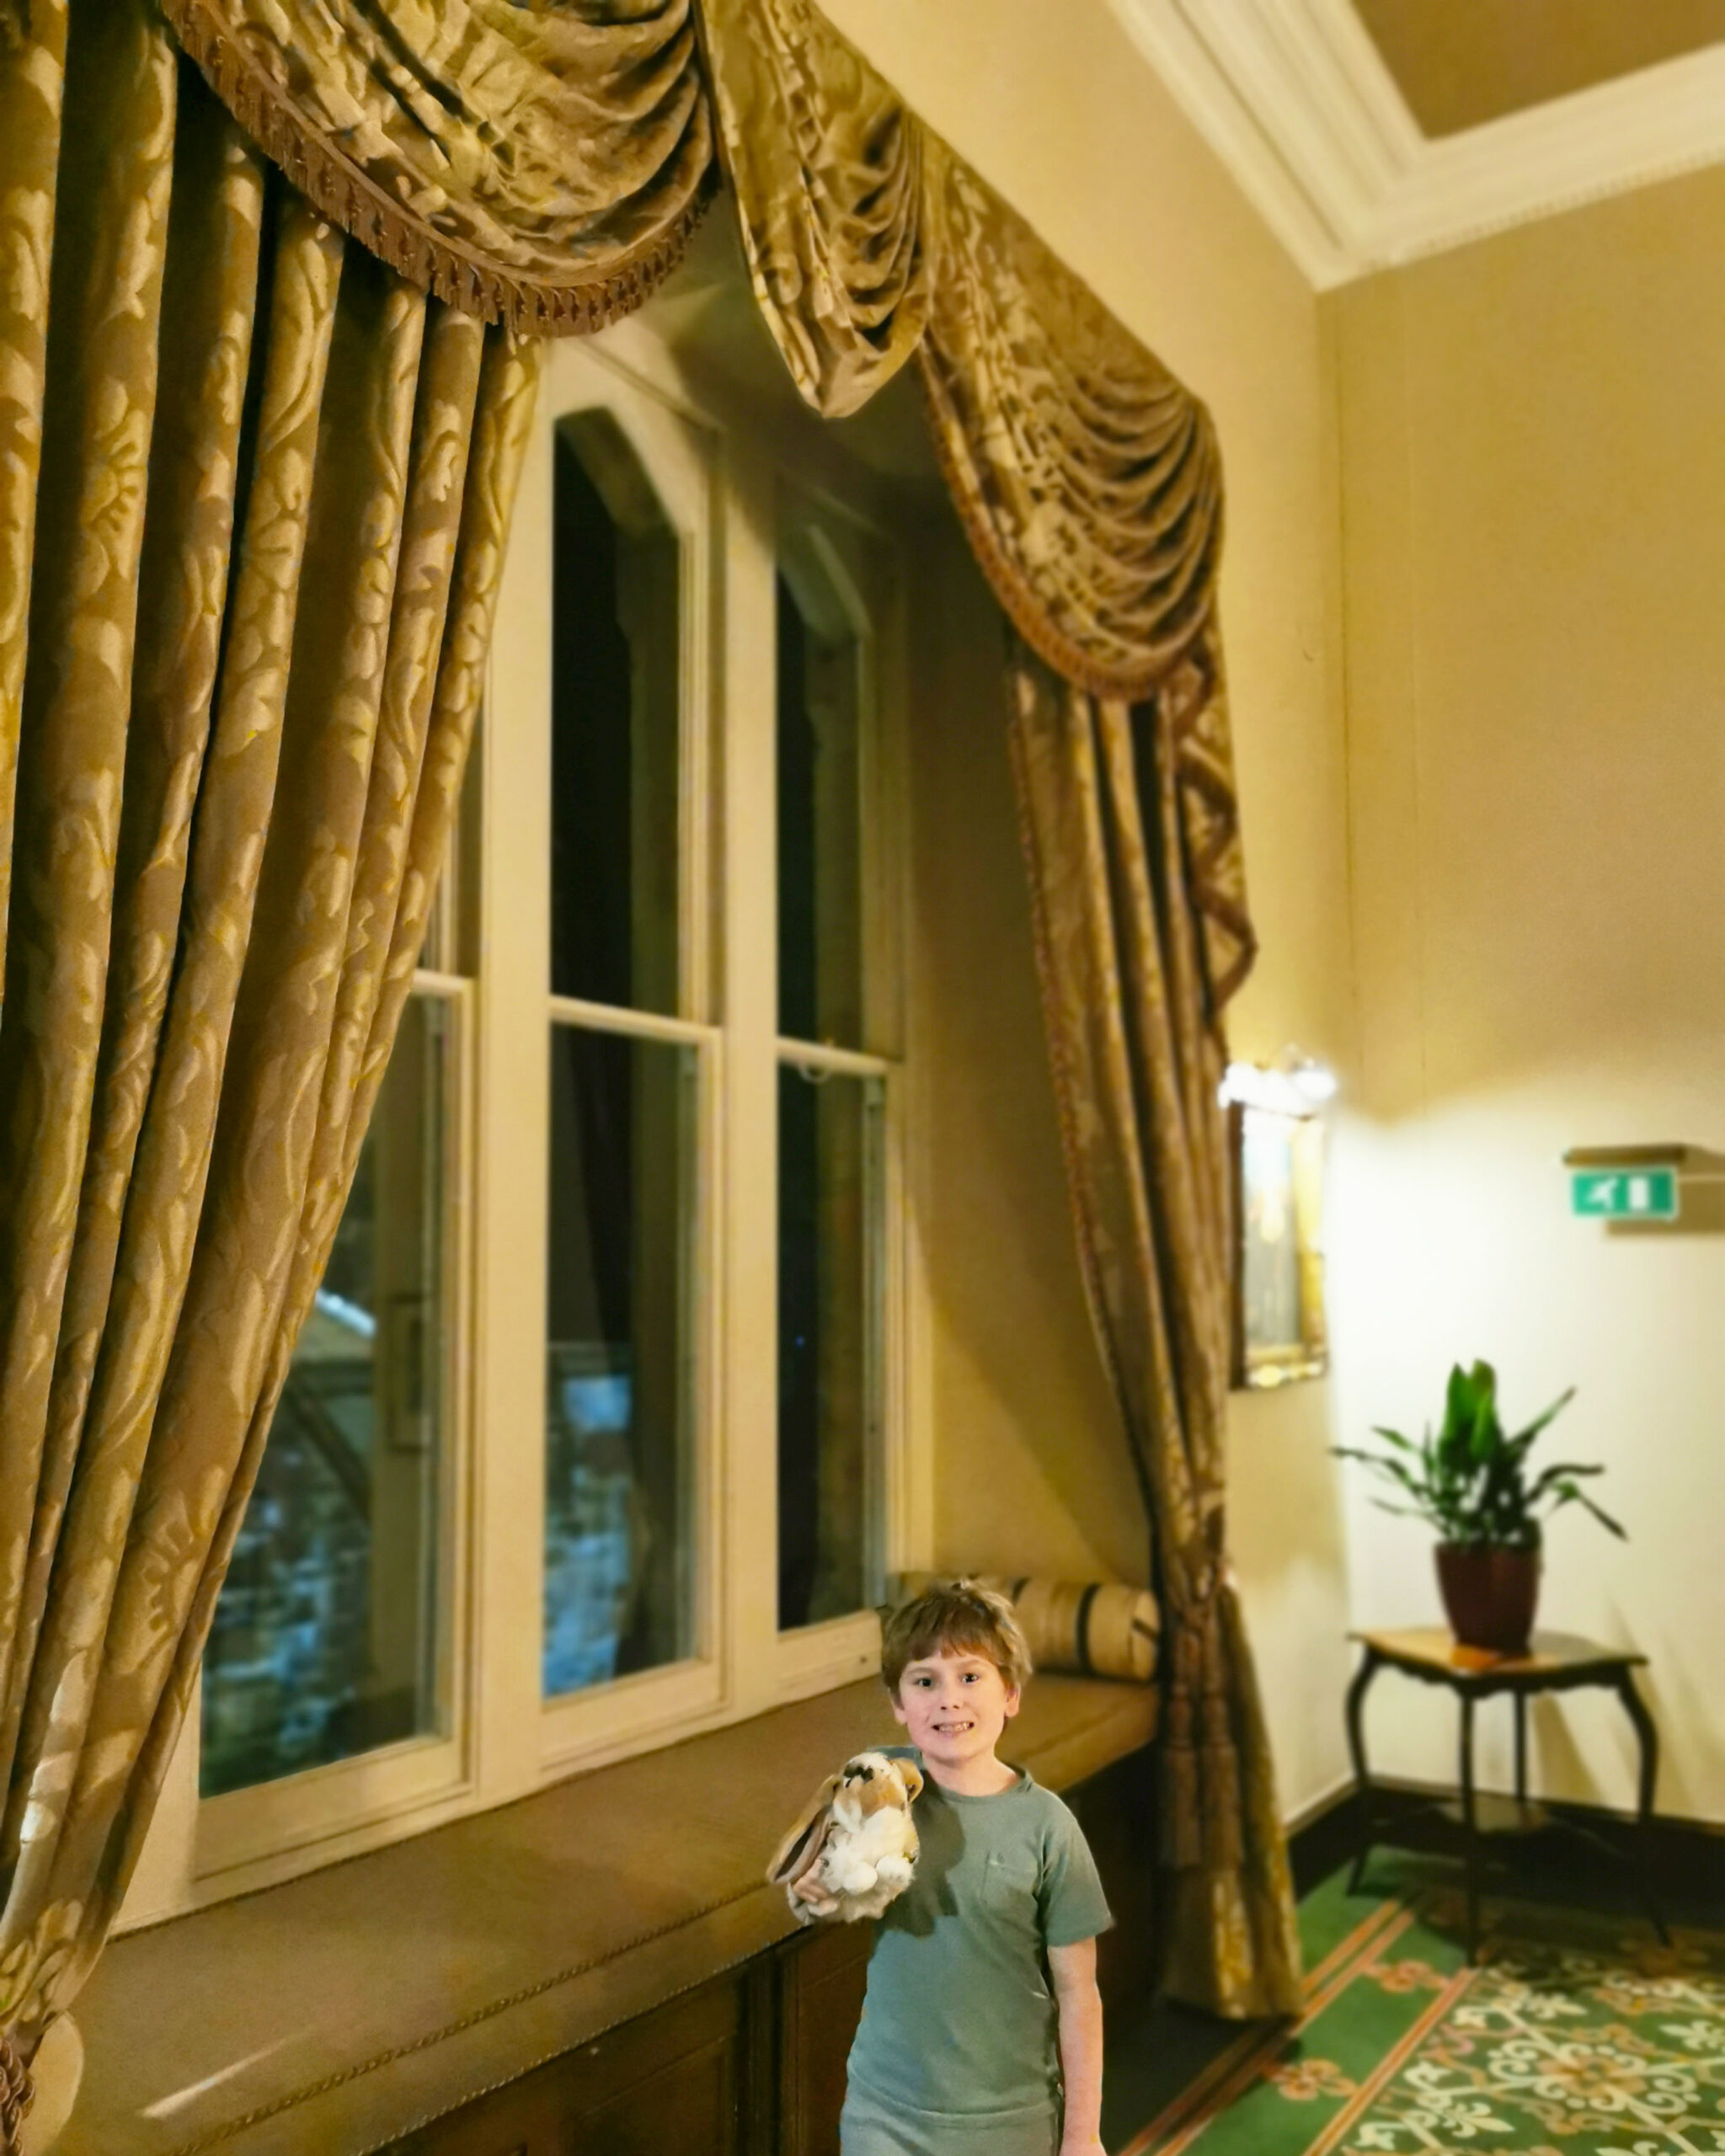  Ashdown Park Hotel, Family-Friendly, Family Staycation, Ashdown Forest, East Sussex, Hotel Review, Family Blog, Family Travel, Hotel Review, Family Weekend